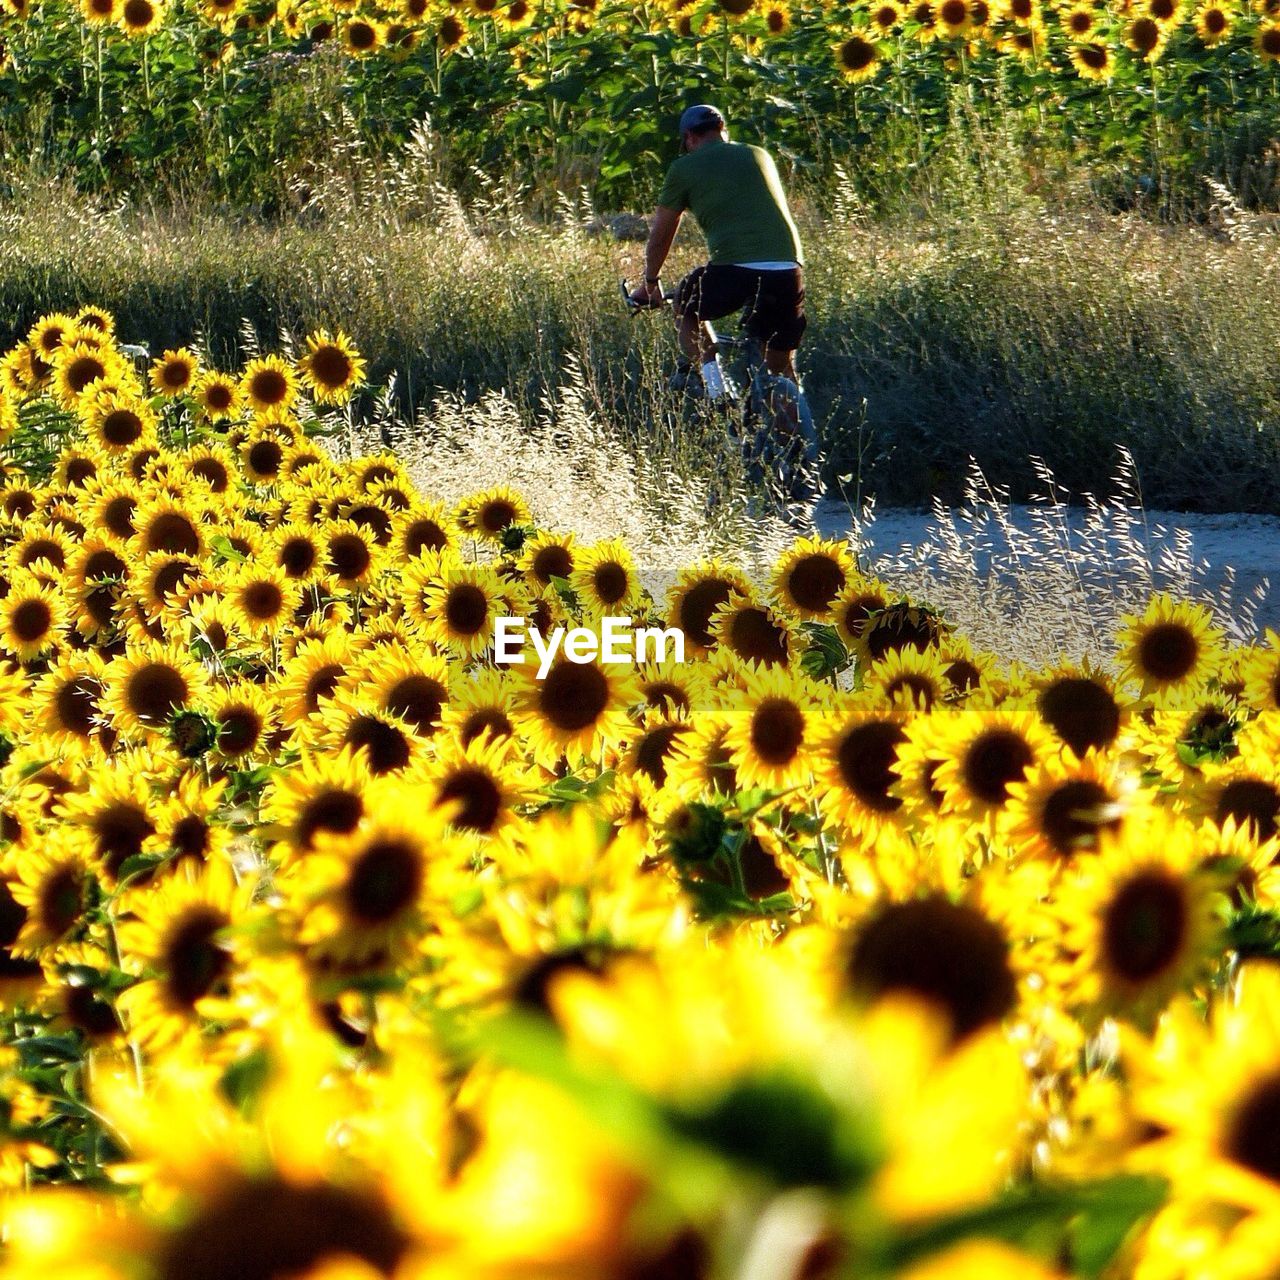 Rear view of a man bicycling with yellow flowers in foreground